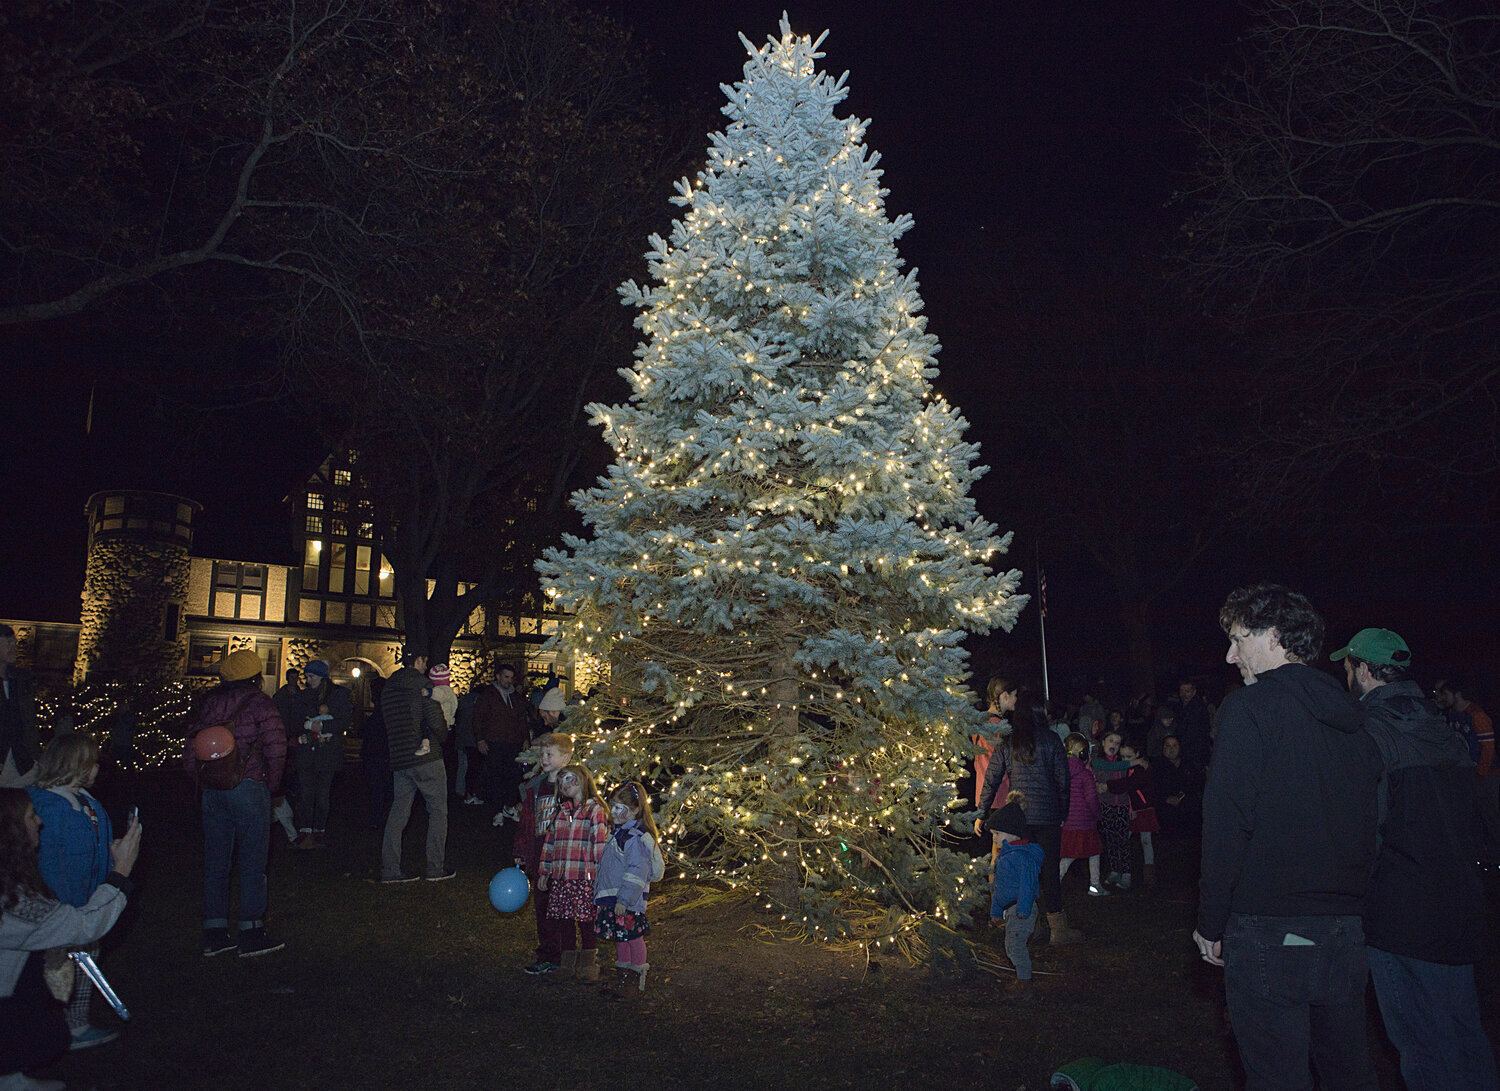 The crowd gathers around the large evergreen during Saturday’s tree-lighting event in Barrington.